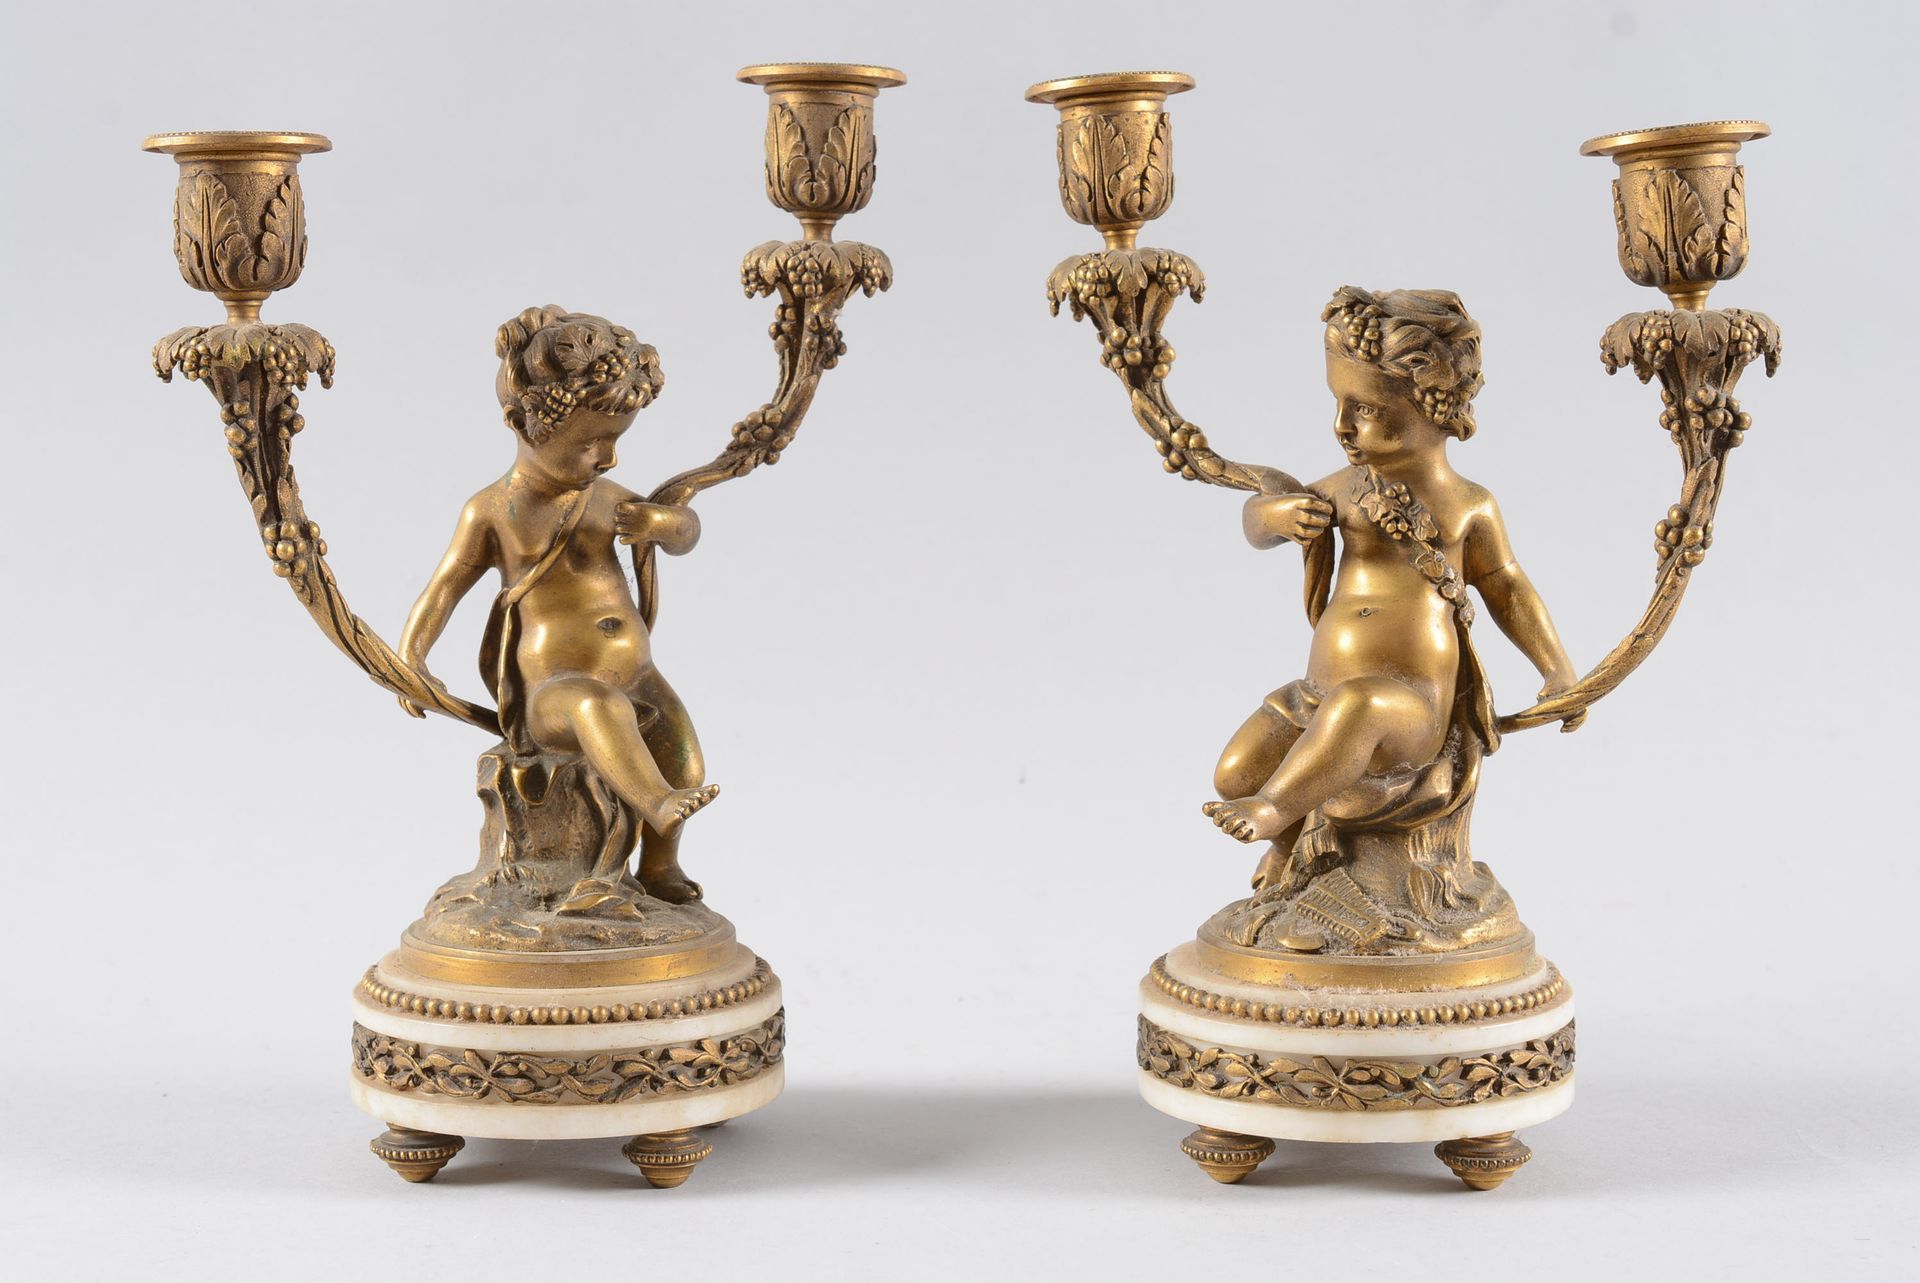 Paire de bougeoirs CLODION CLODION (1738-1814), after

A pair of two-light cande&hellip;